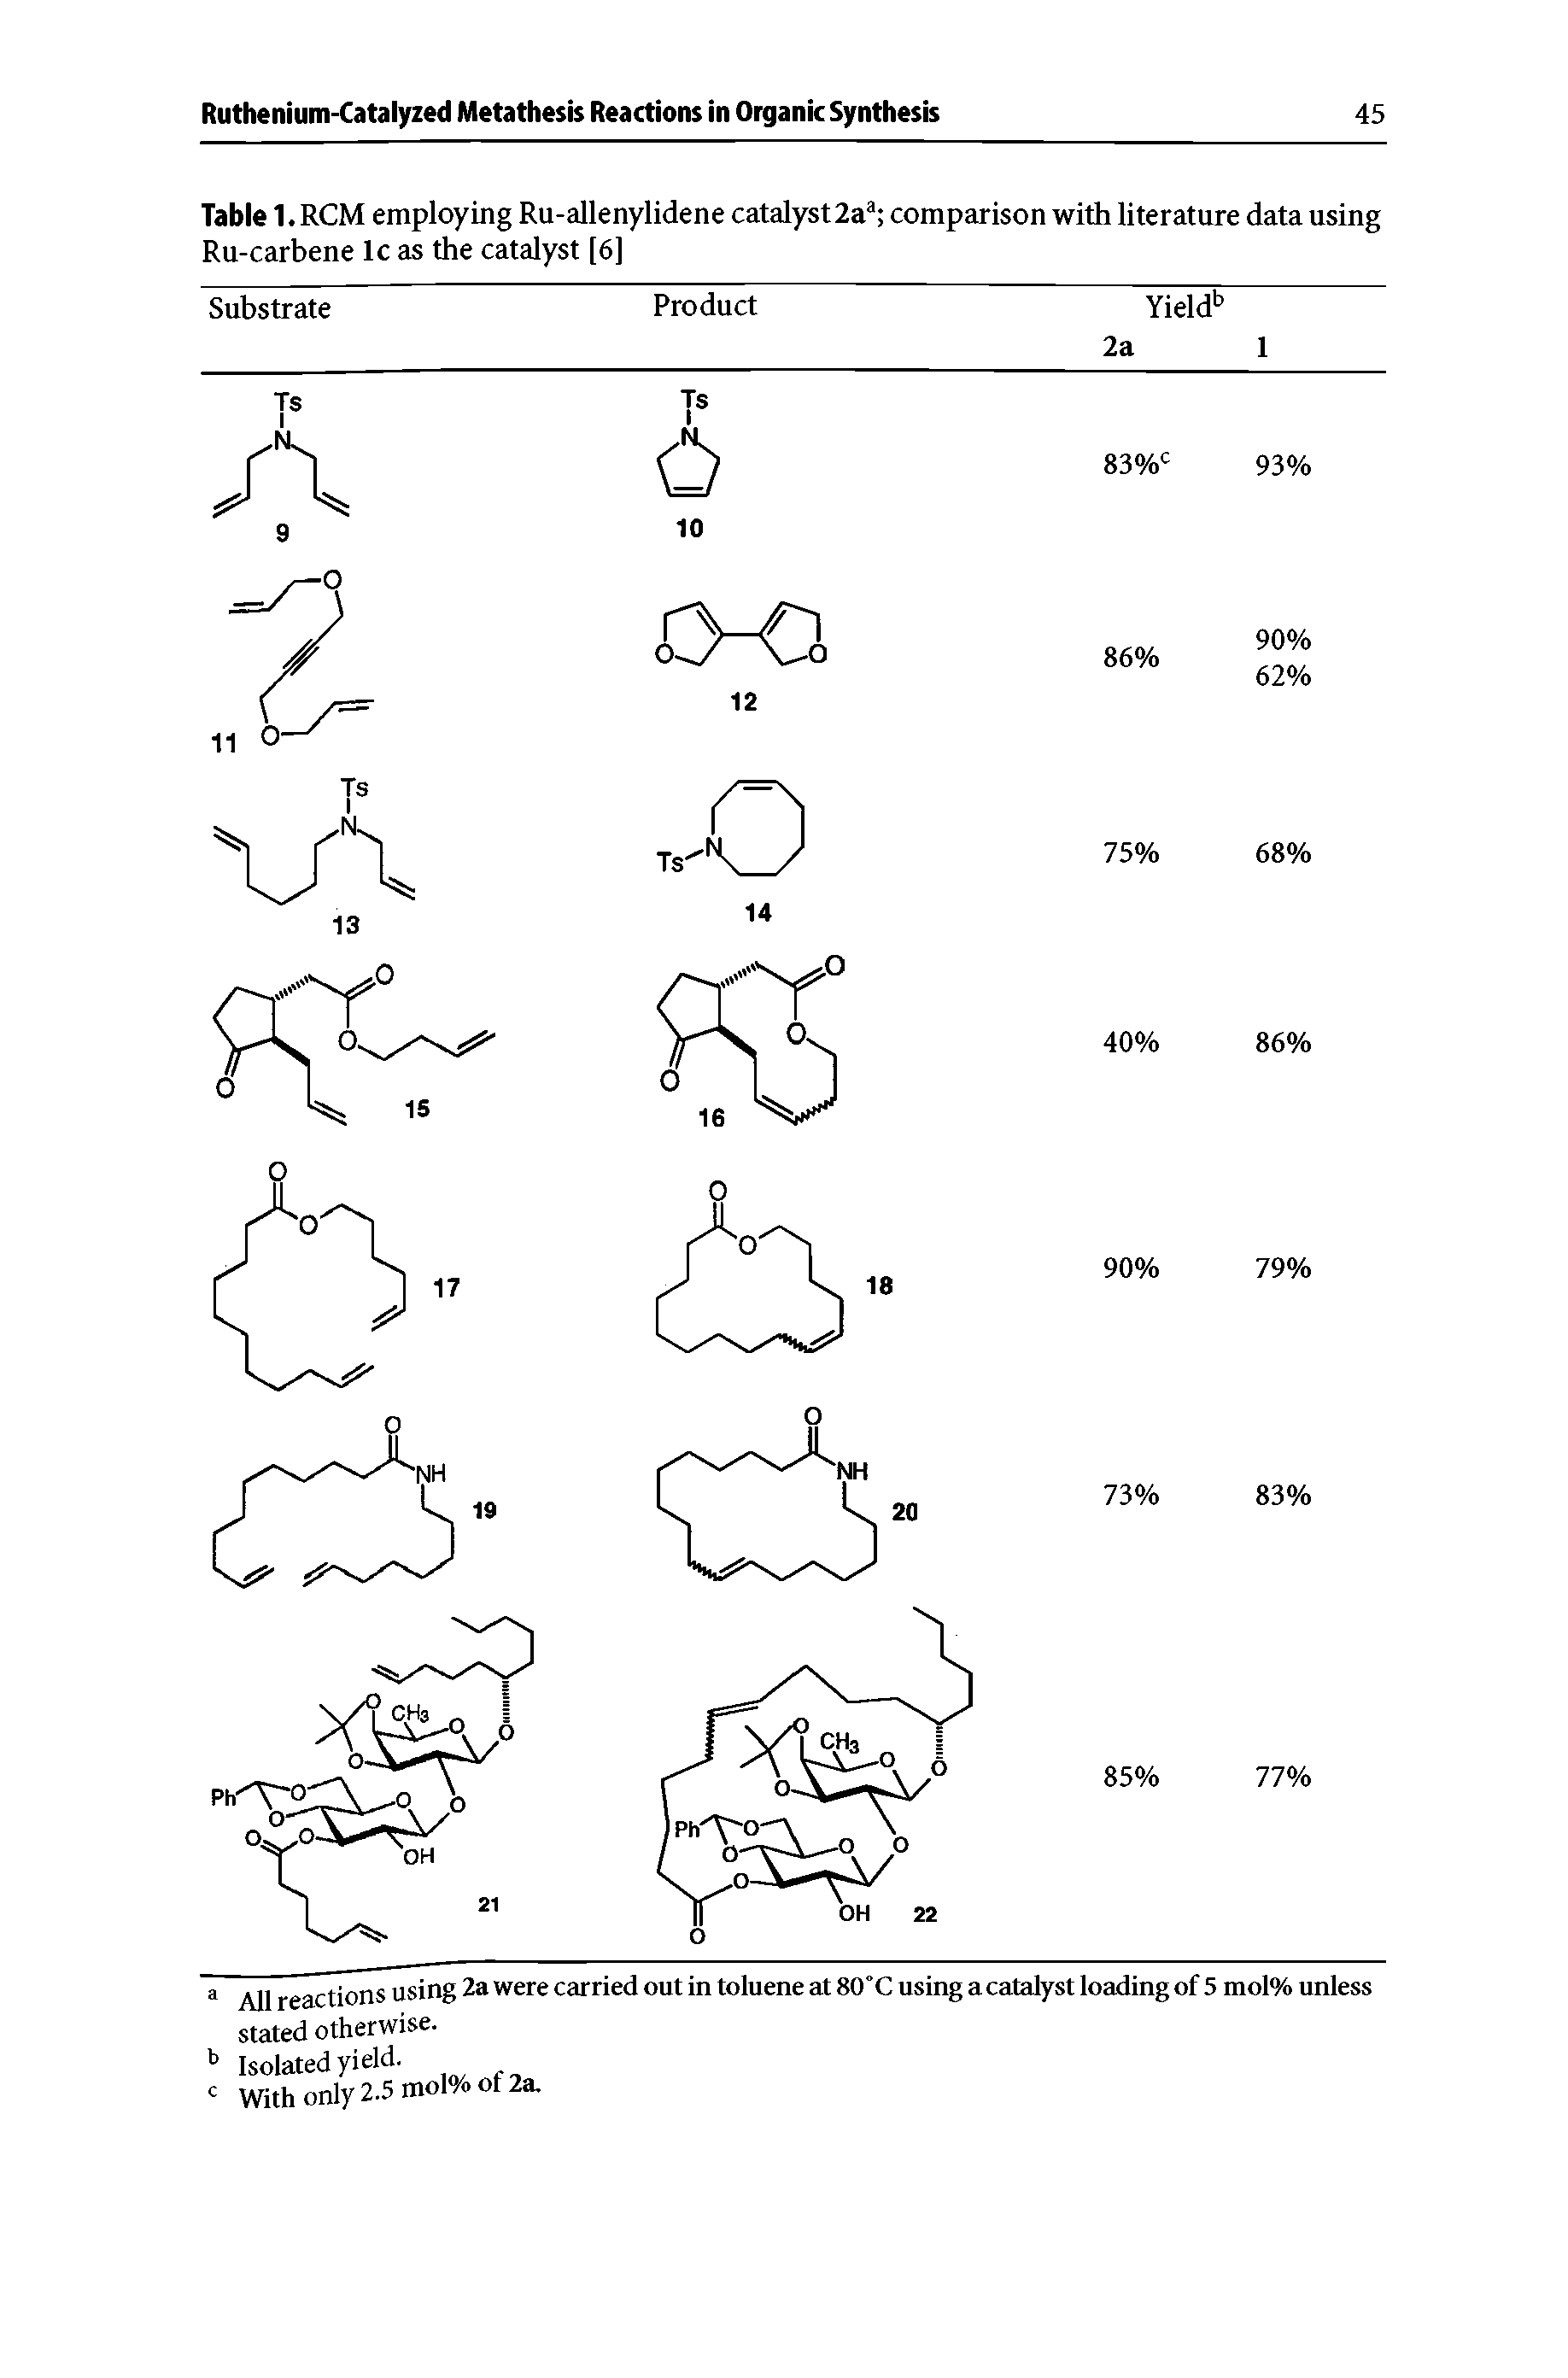 Table 1.RCM employing Ru-allenylidene catalyst 2aa comparison with literature data using Ru-carbene lc as the catalyst [6]...